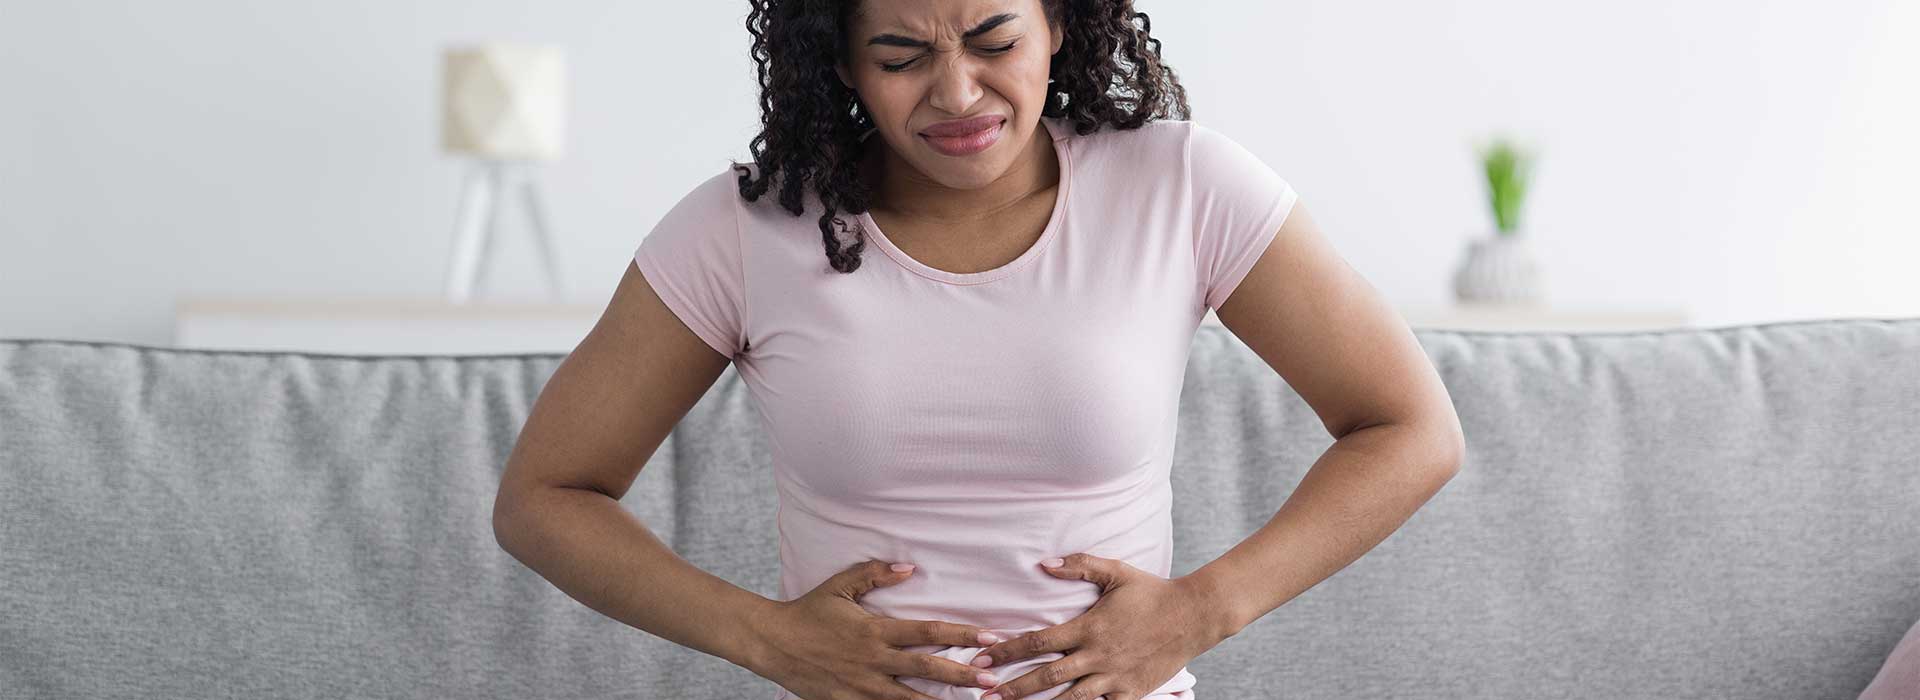 Mature woman suffering from gastritis